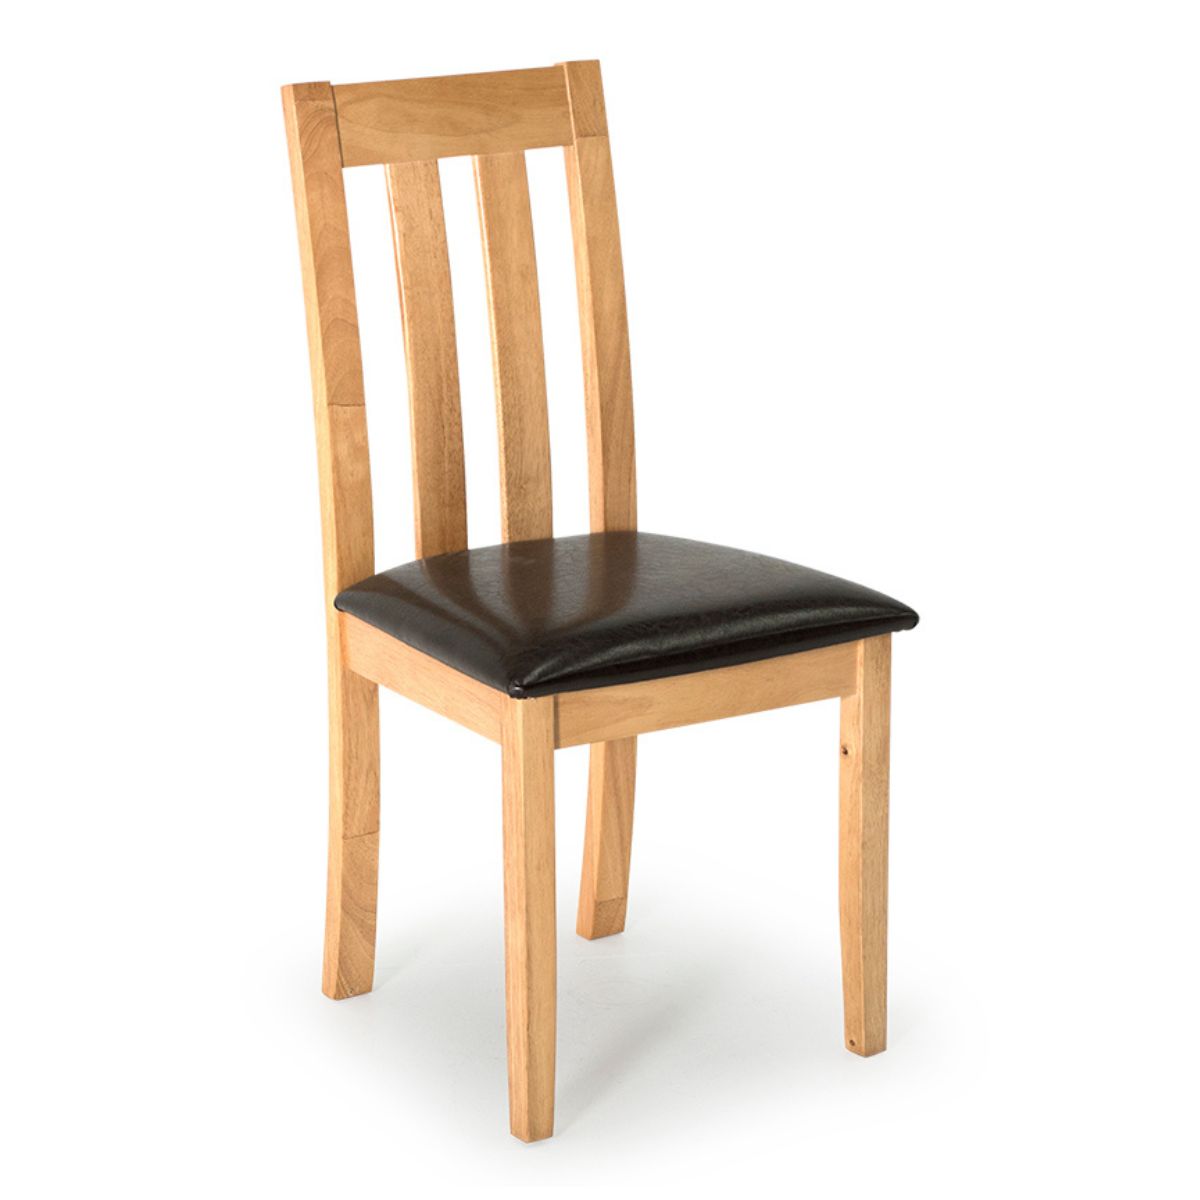 Andrew Oak Dining Chair - 1